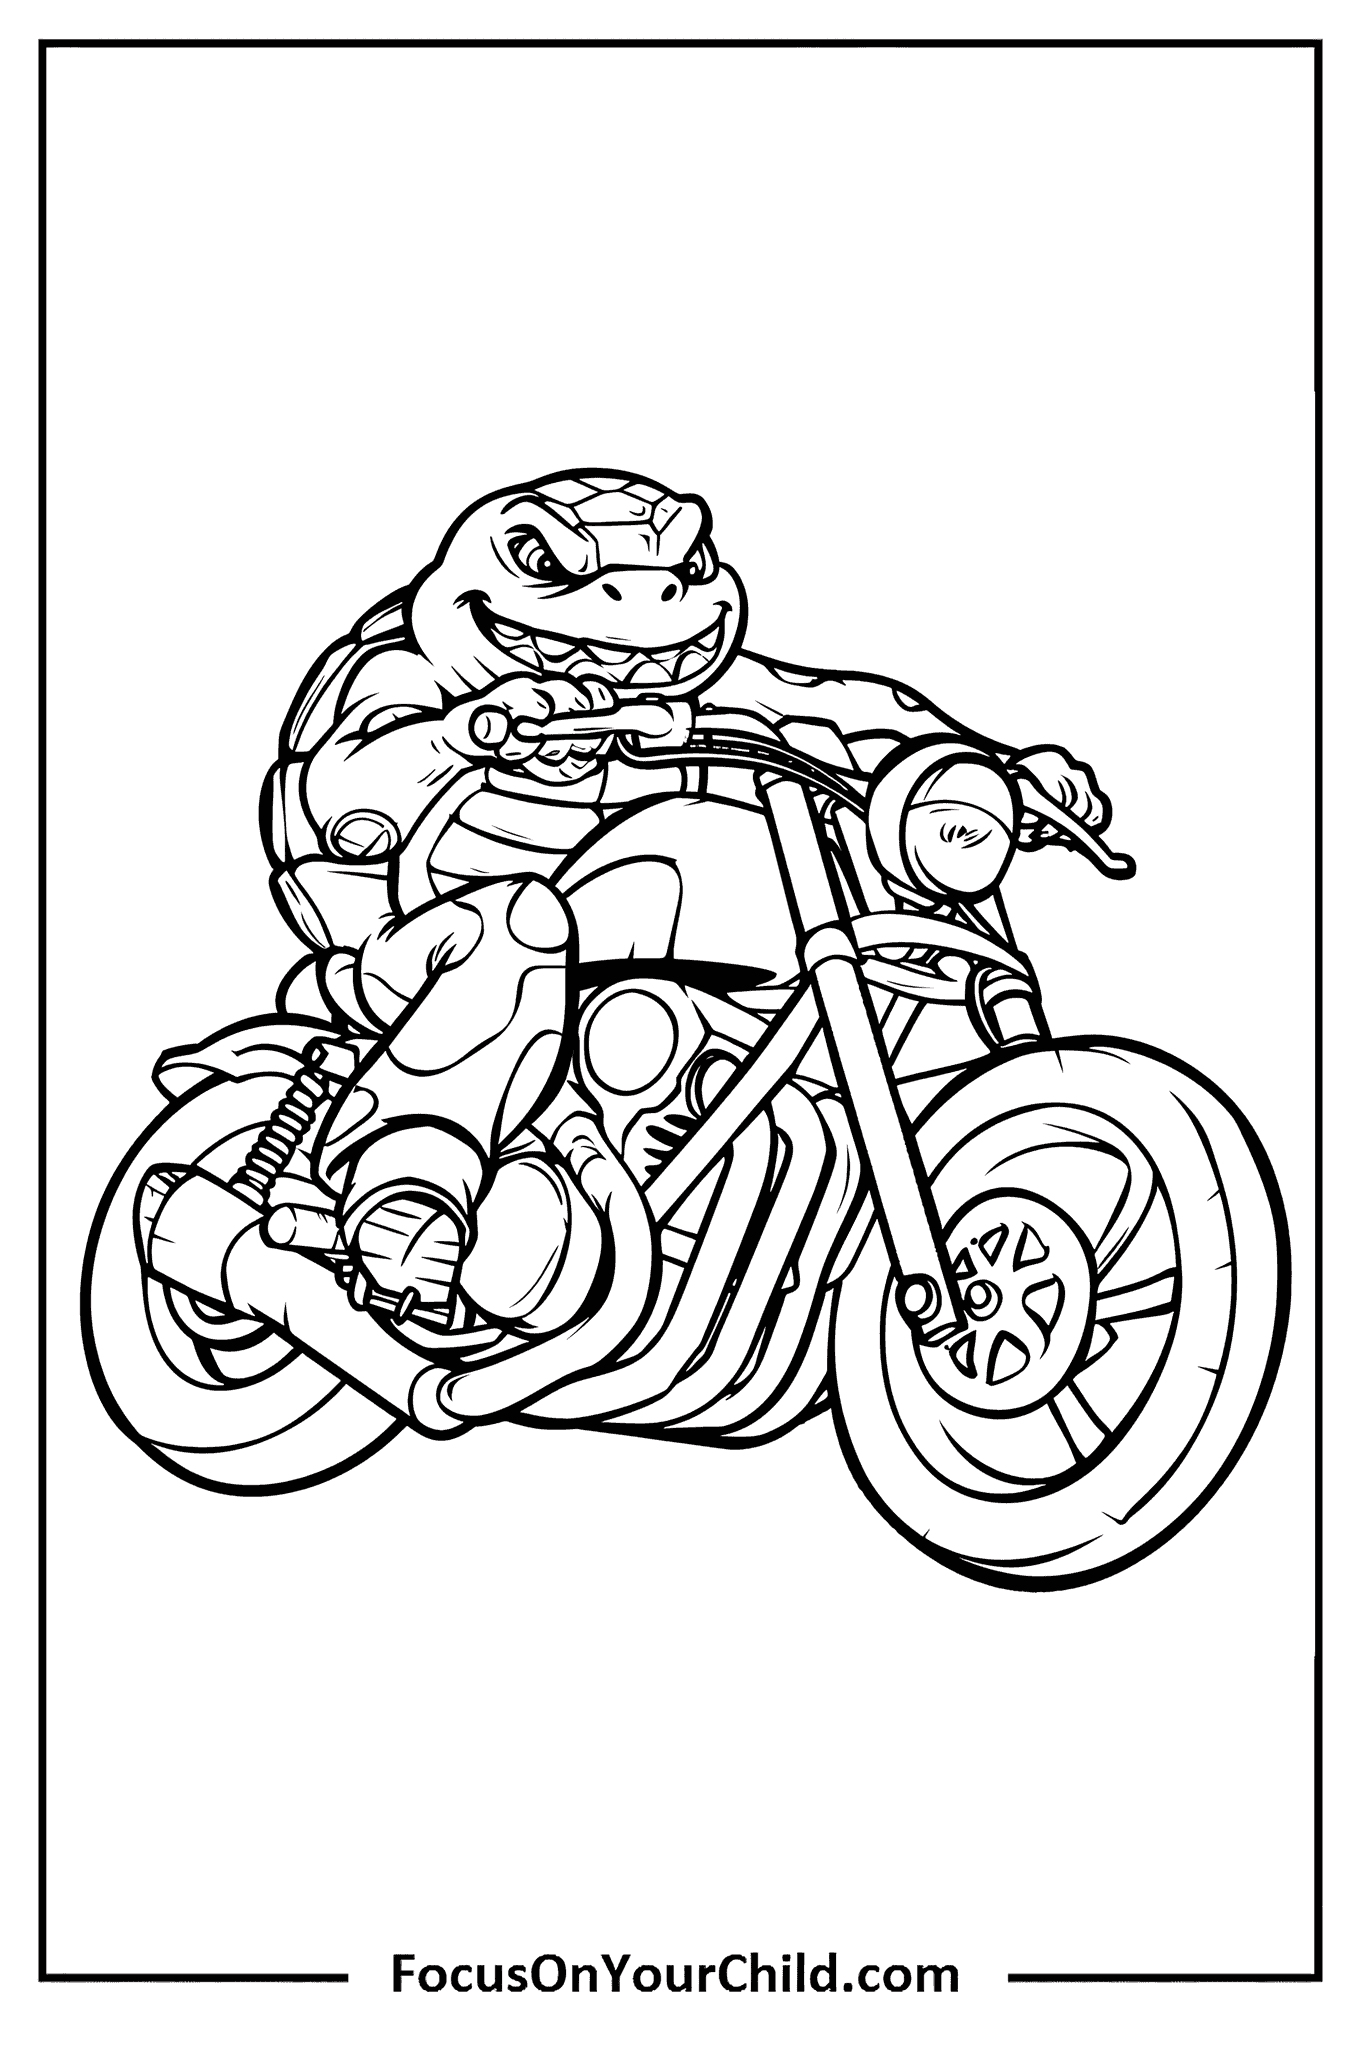 Adventurous turtle riding motorcycle in detailed black-and-white line drawing.